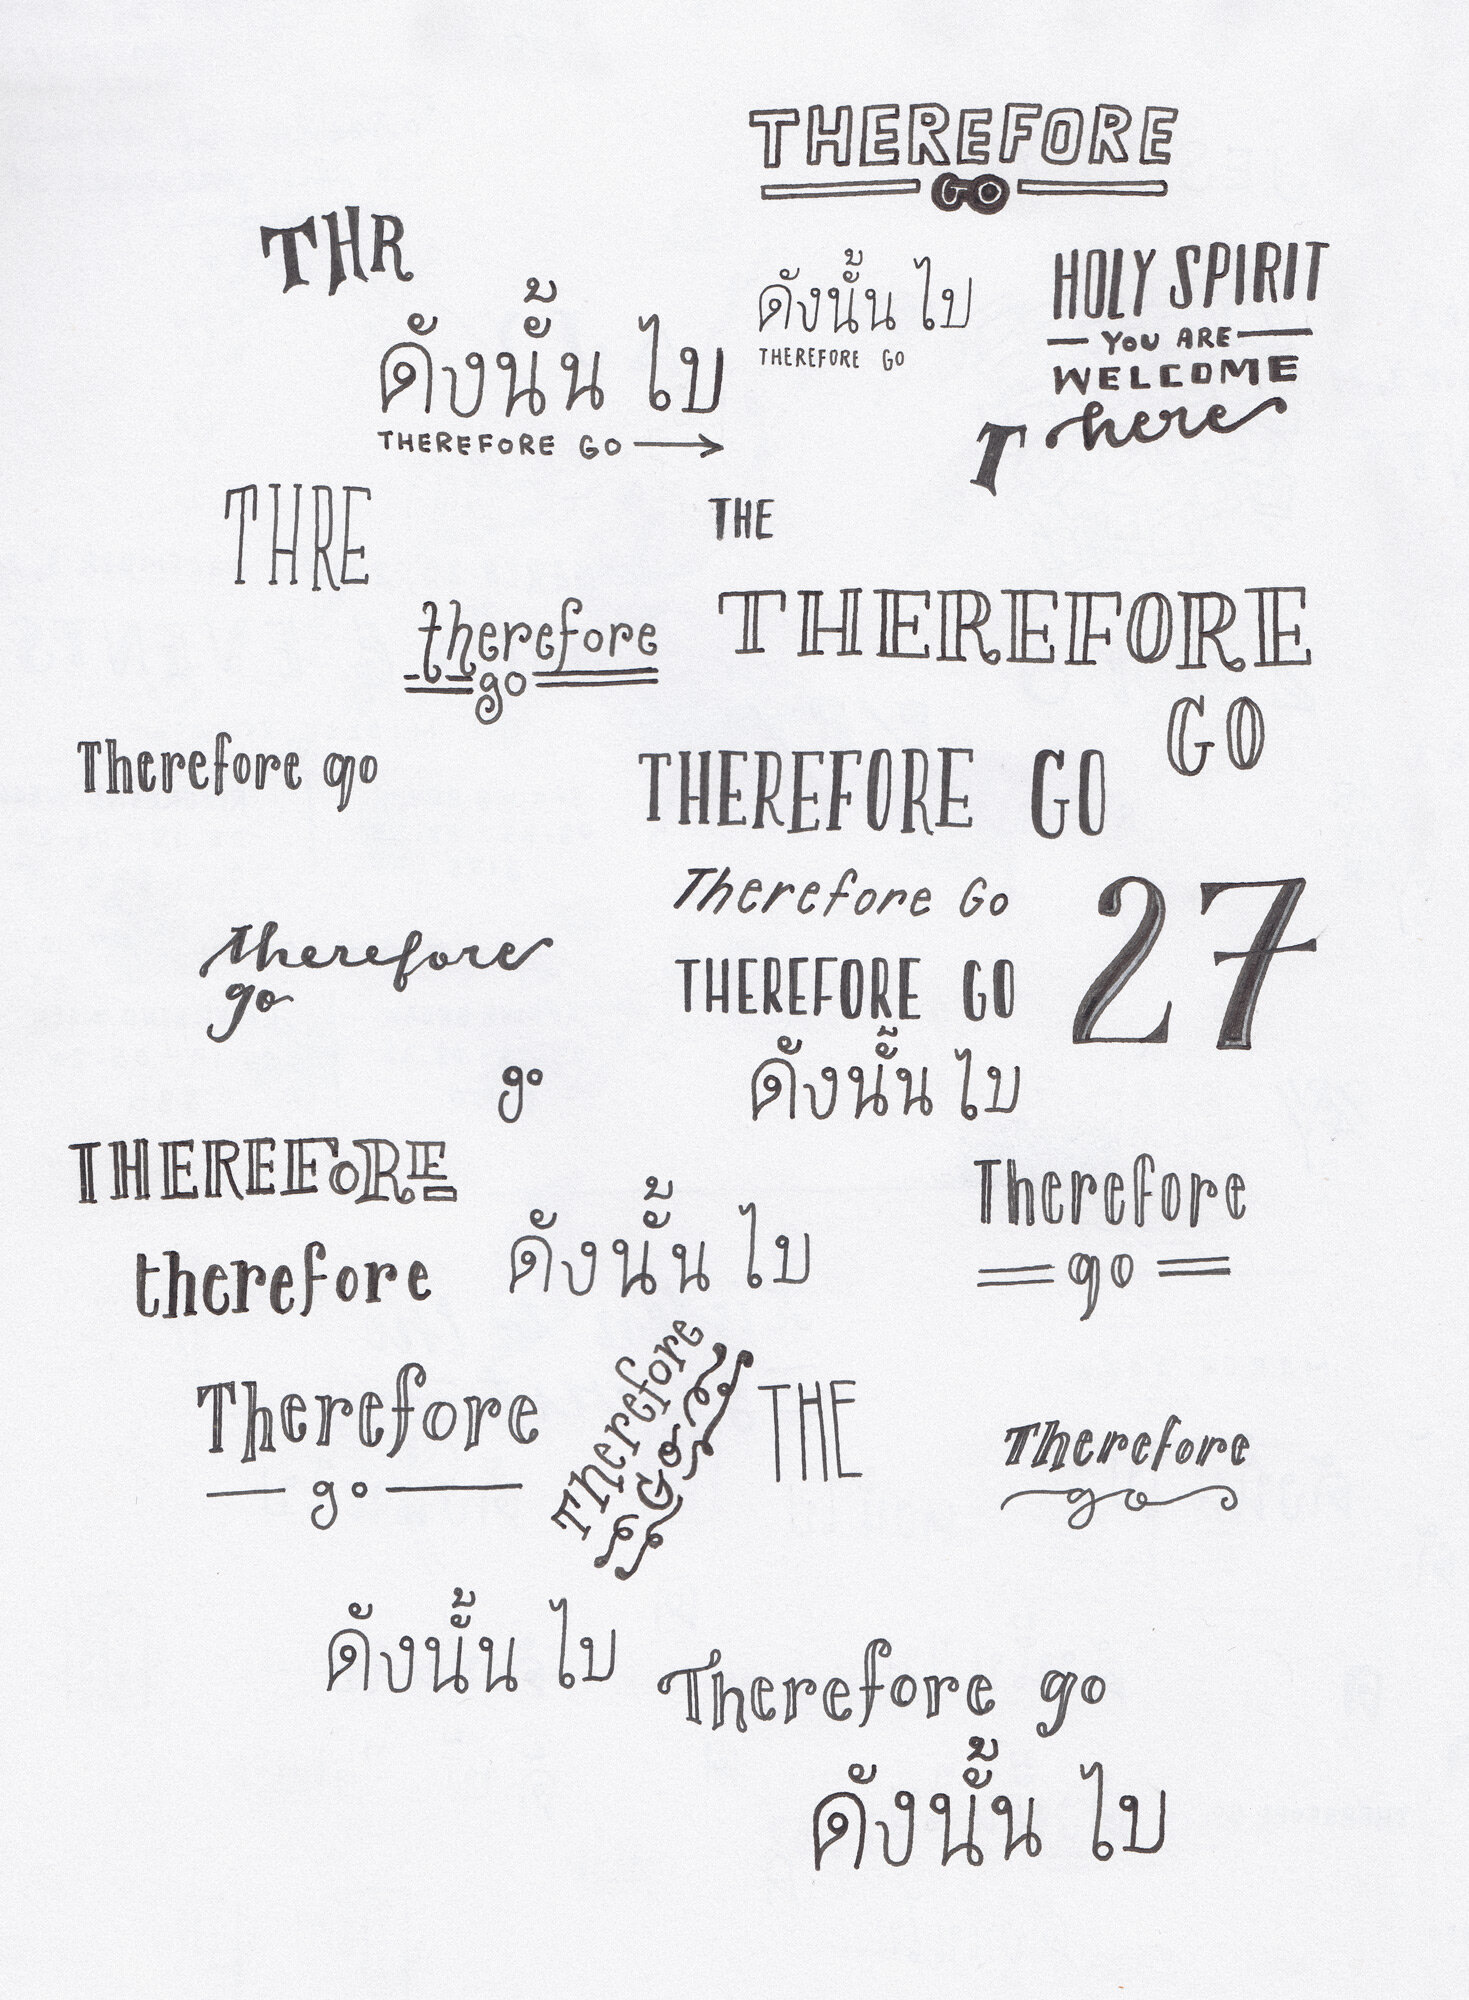 therefore-process-2.jpg